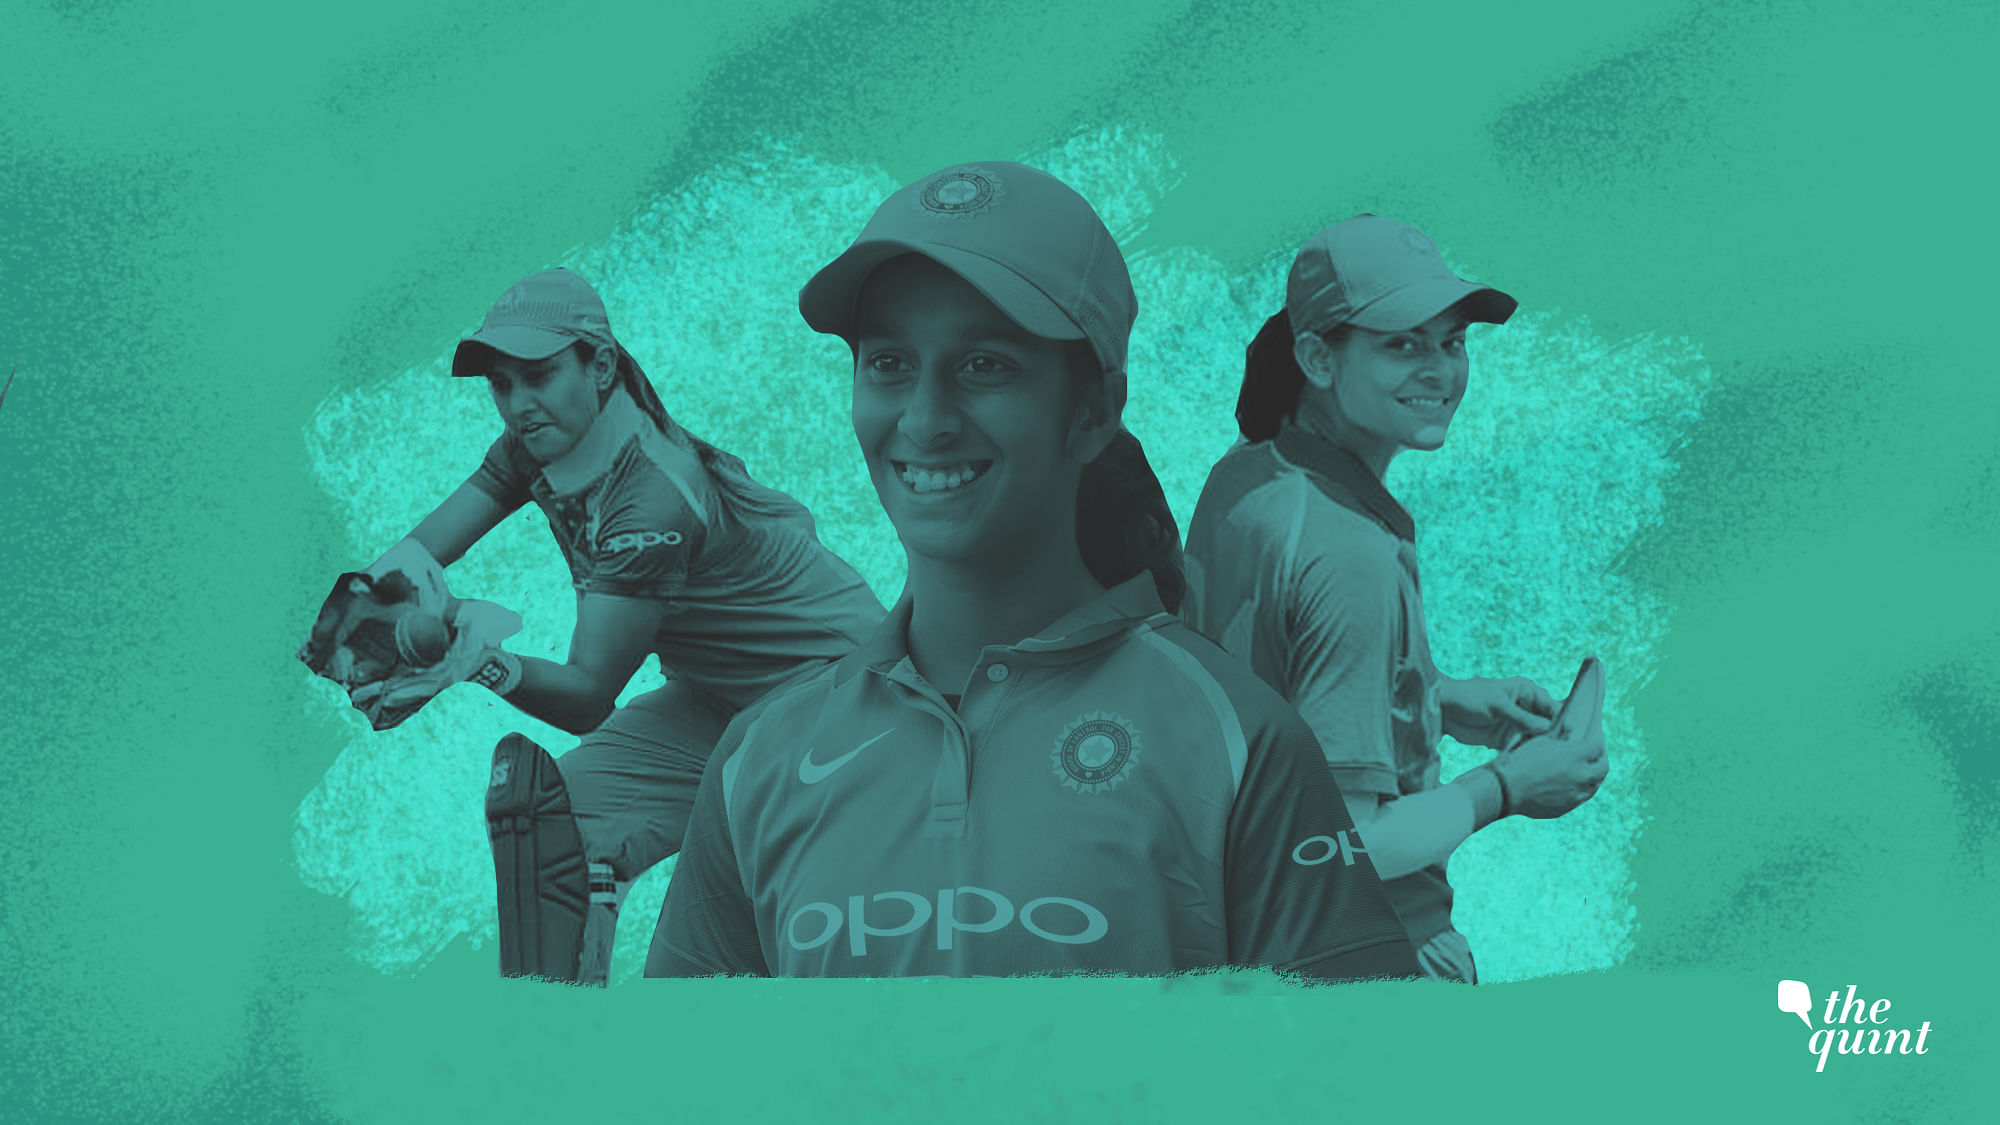 India start their Women’s World T20 campaign this Friday against New Zealand at 8:30pm IST.